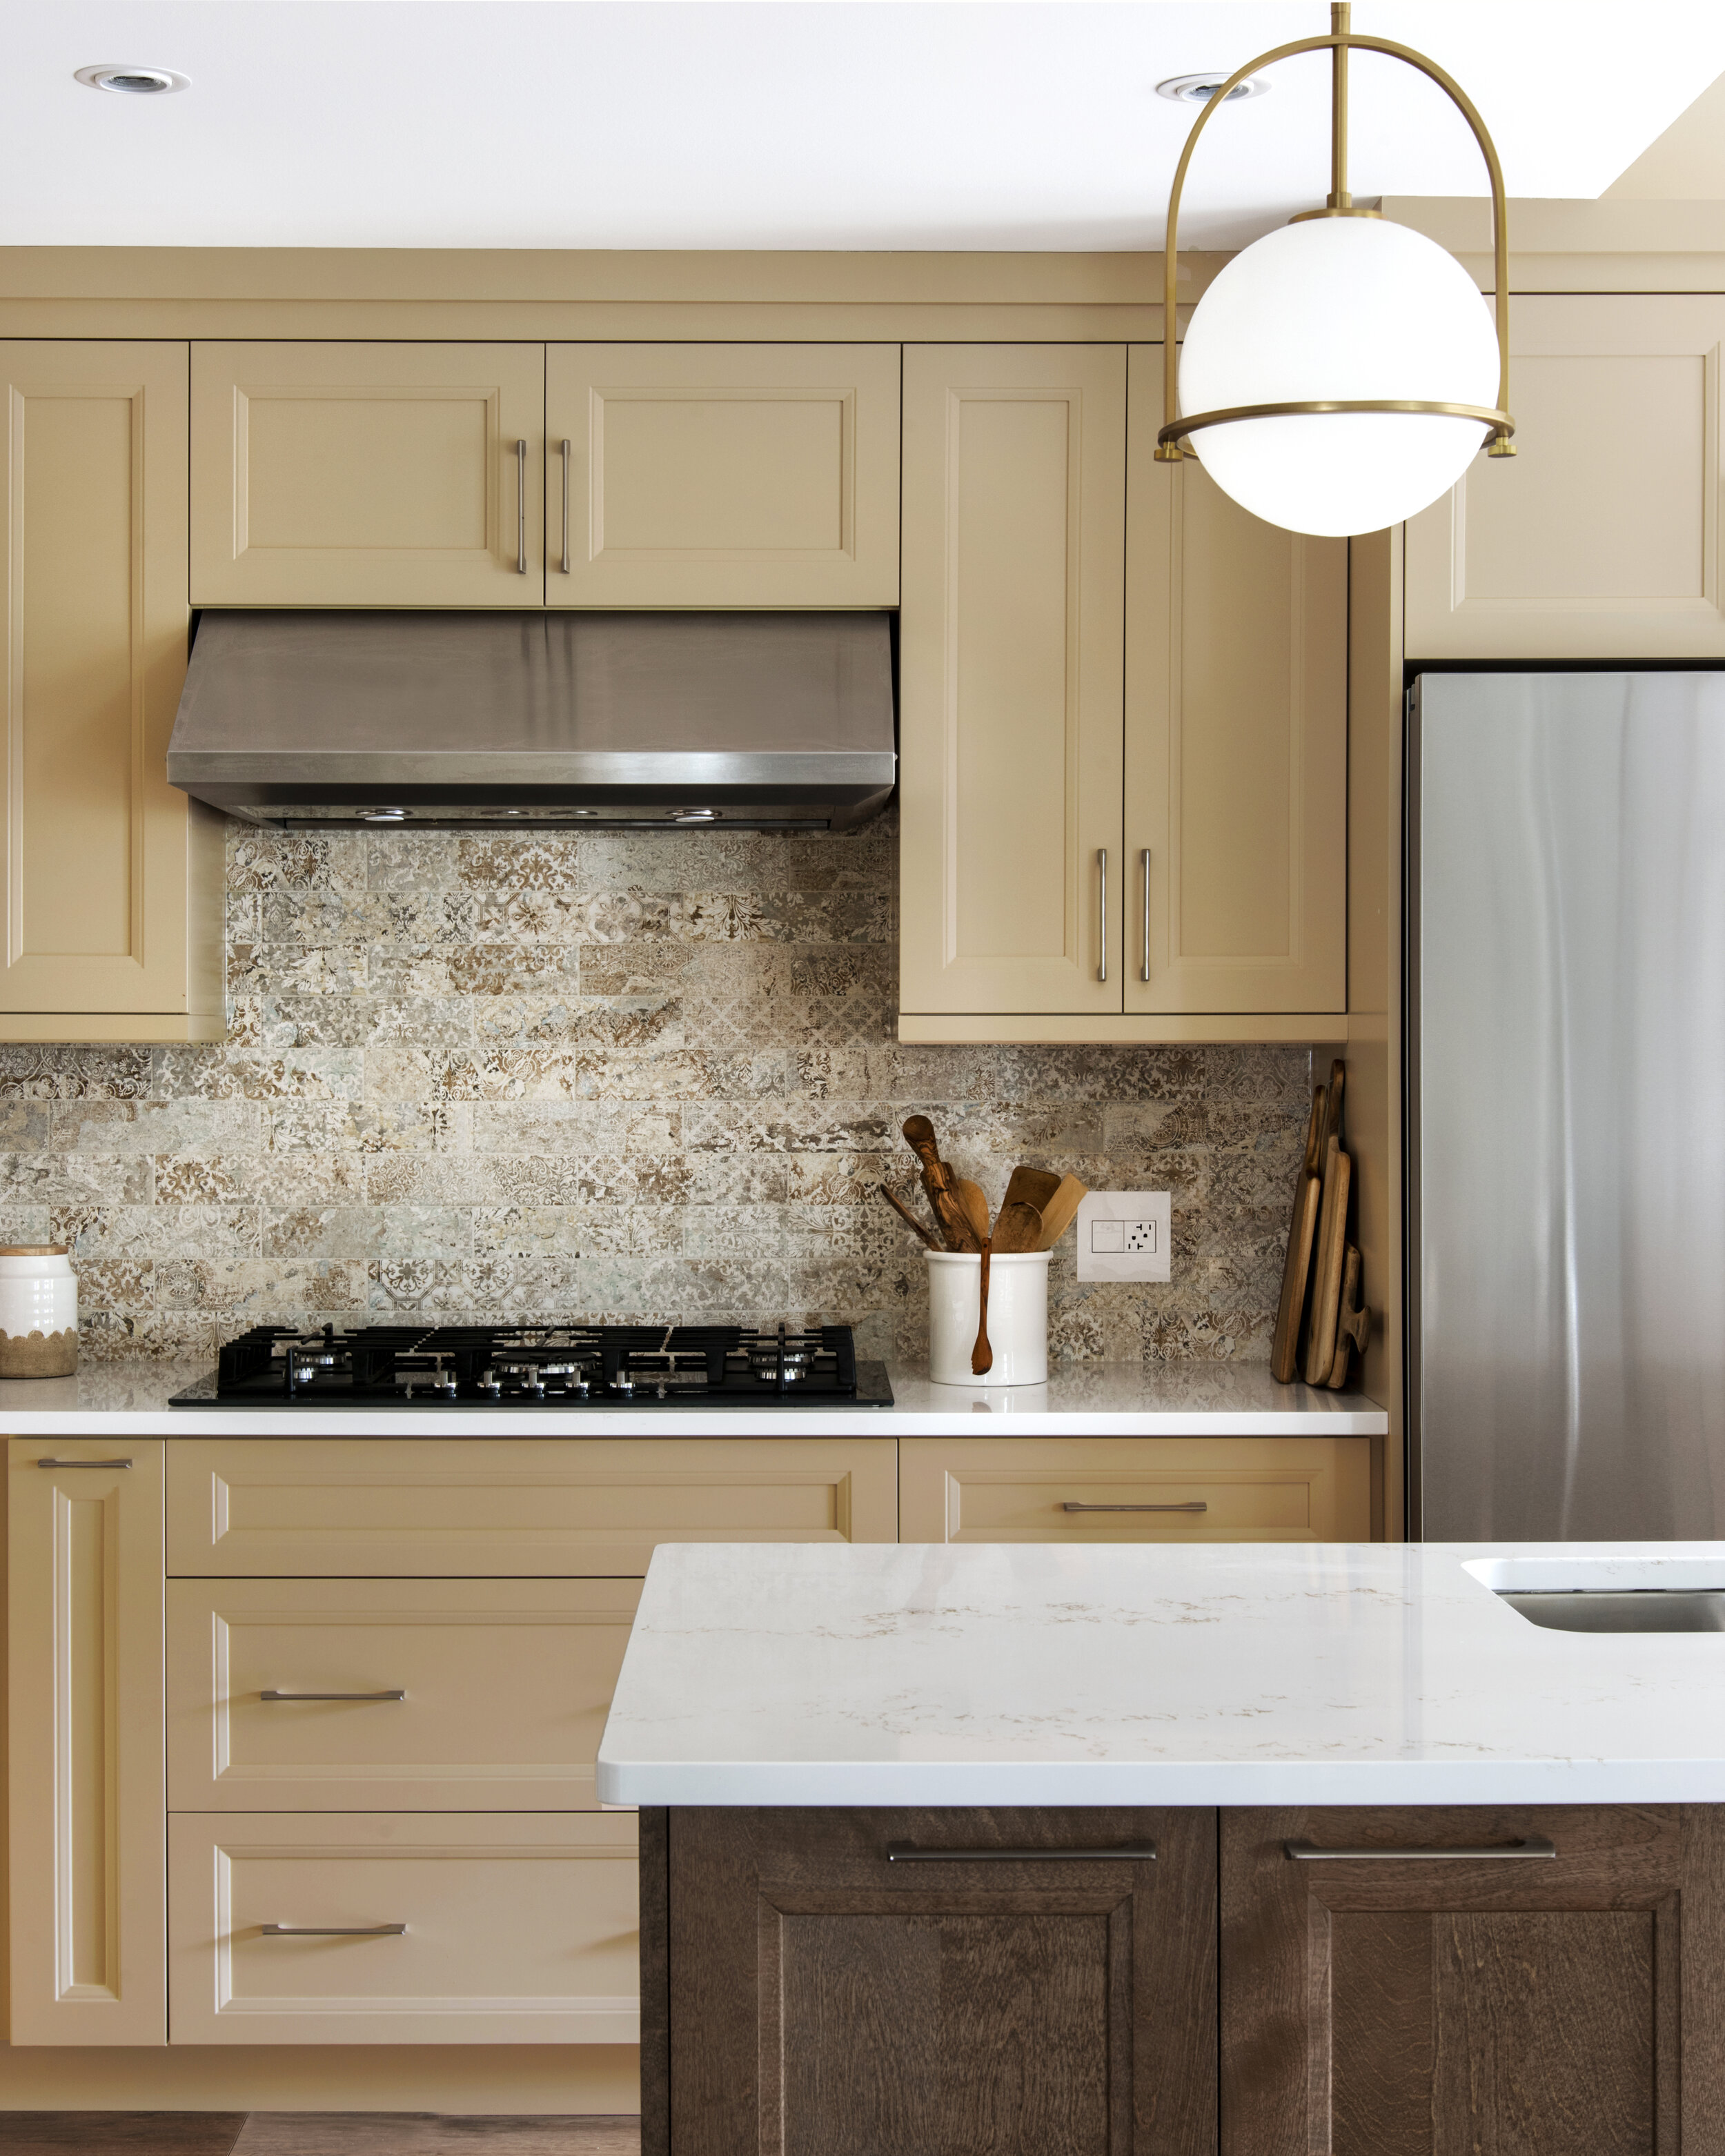  Unique design elements in the backsplash tailored to this family’s style. 